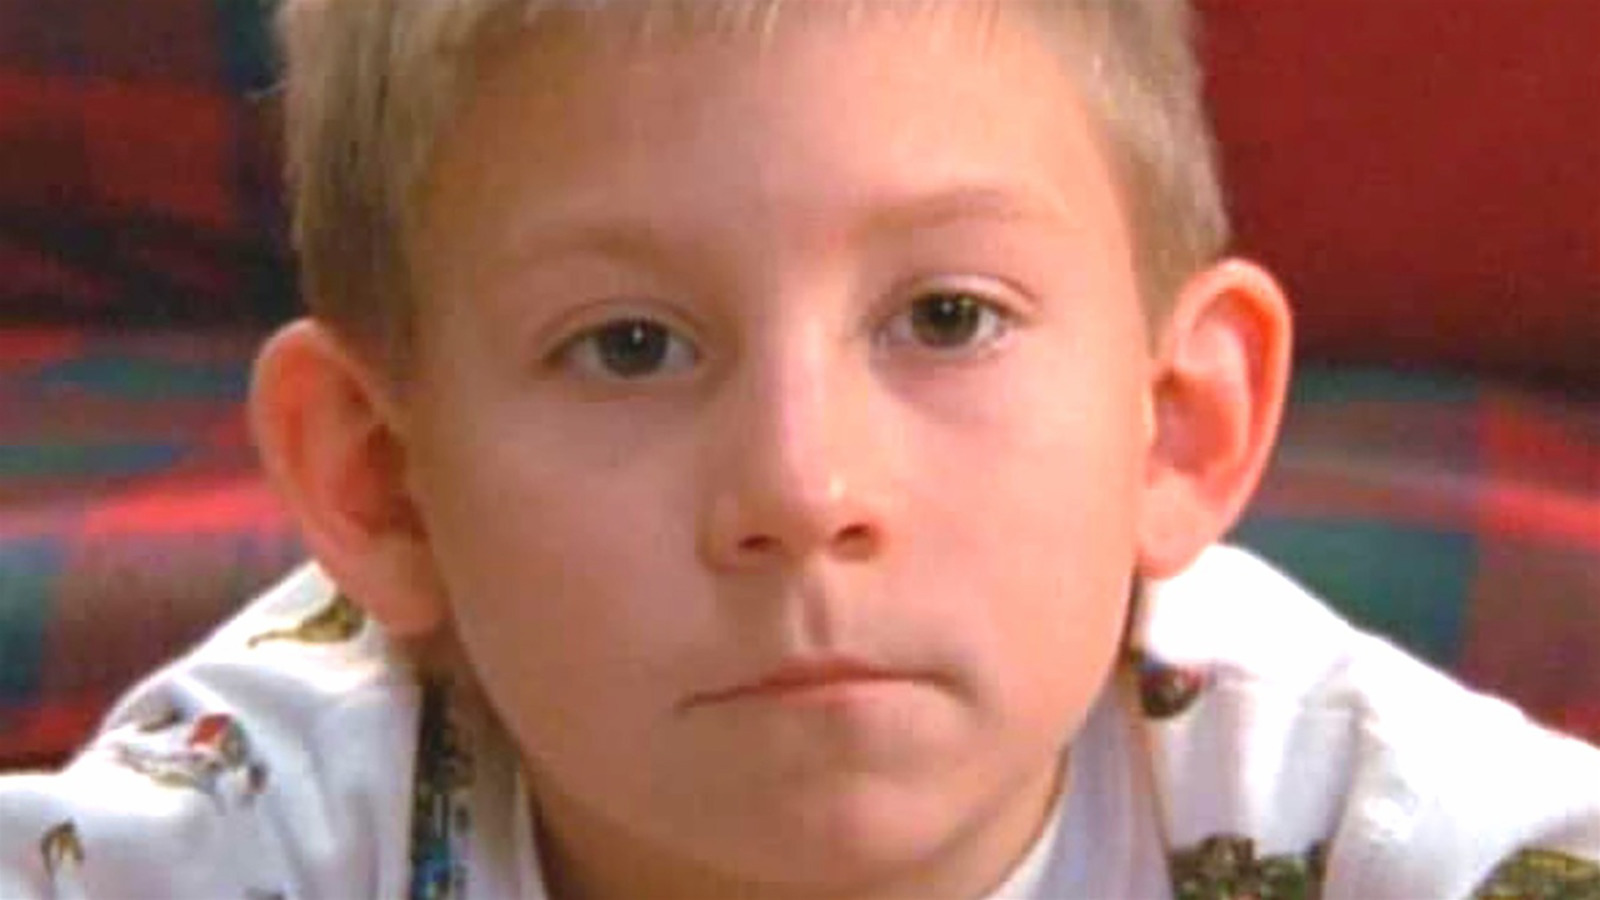 Whatever Happened To Dewey From Malcolm In The Middle?